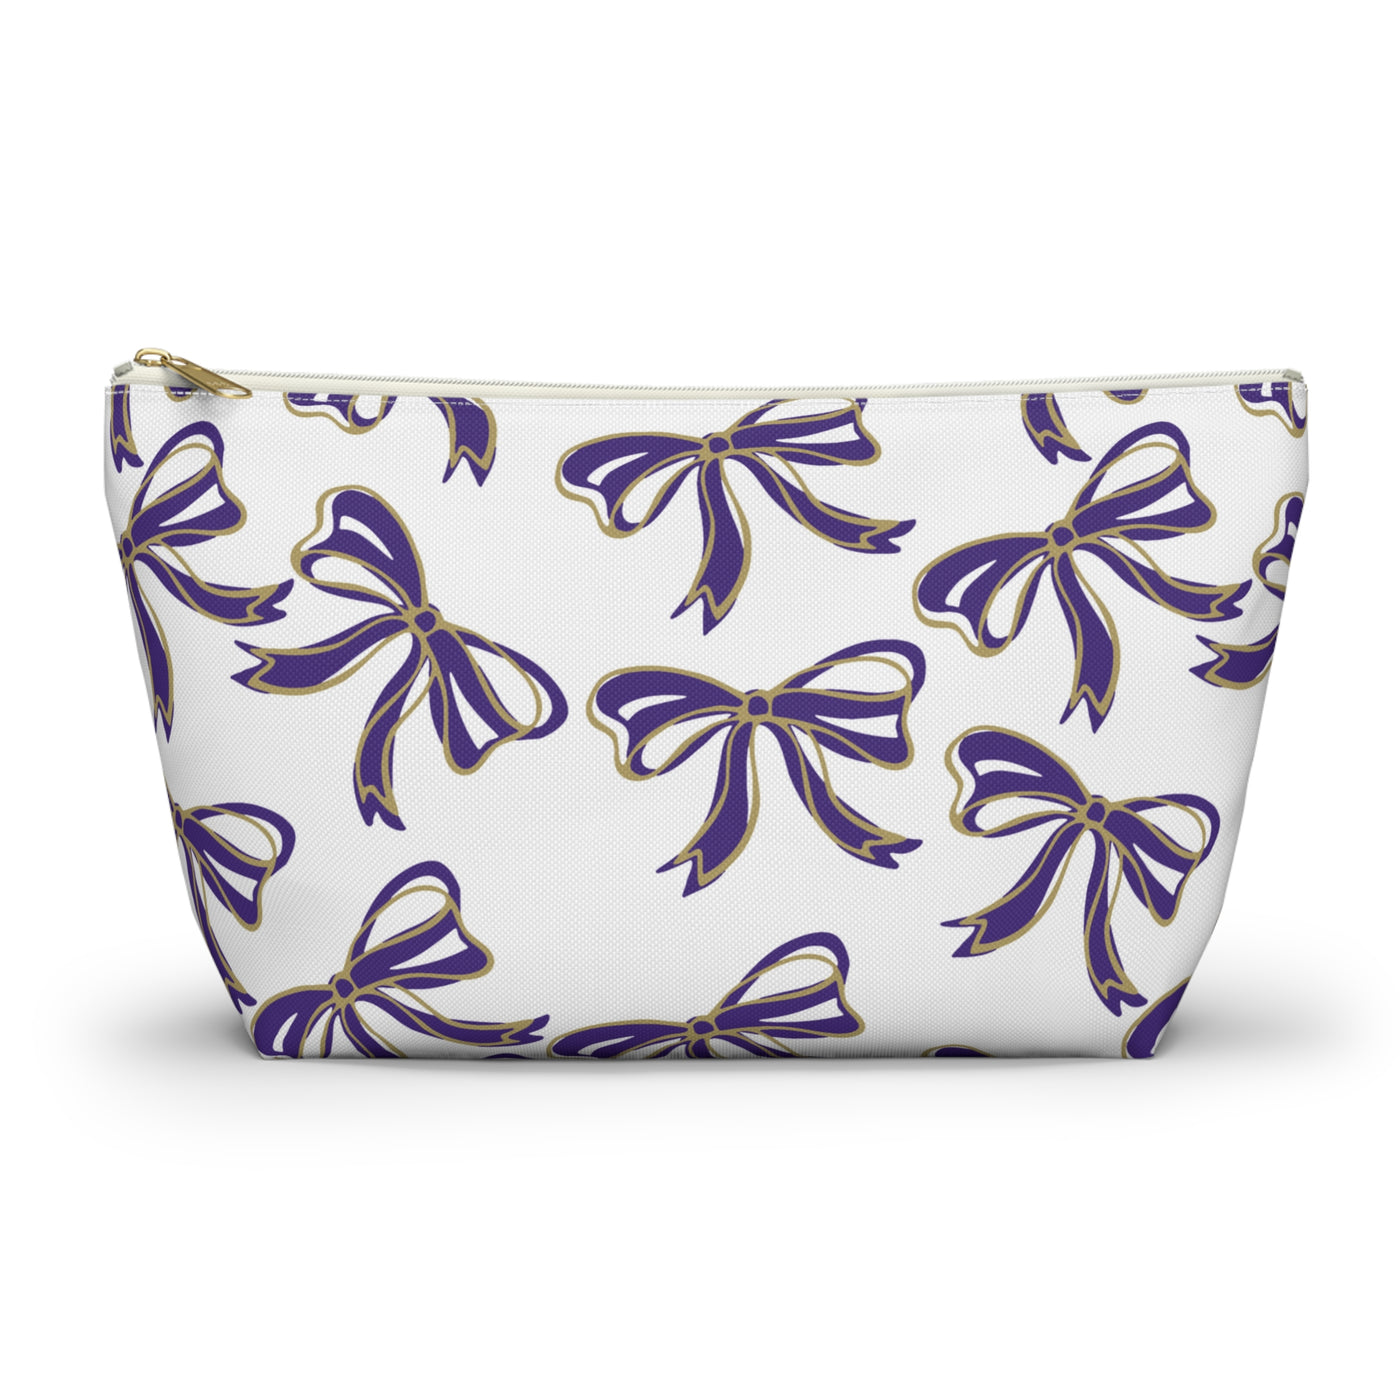 Copy of Trendy Bow Makeup Bag - Graduation Gift, Bed Party Gift, Acceptance Gift, College Gift, Purple and Gold, JMU Dukes, James Madison